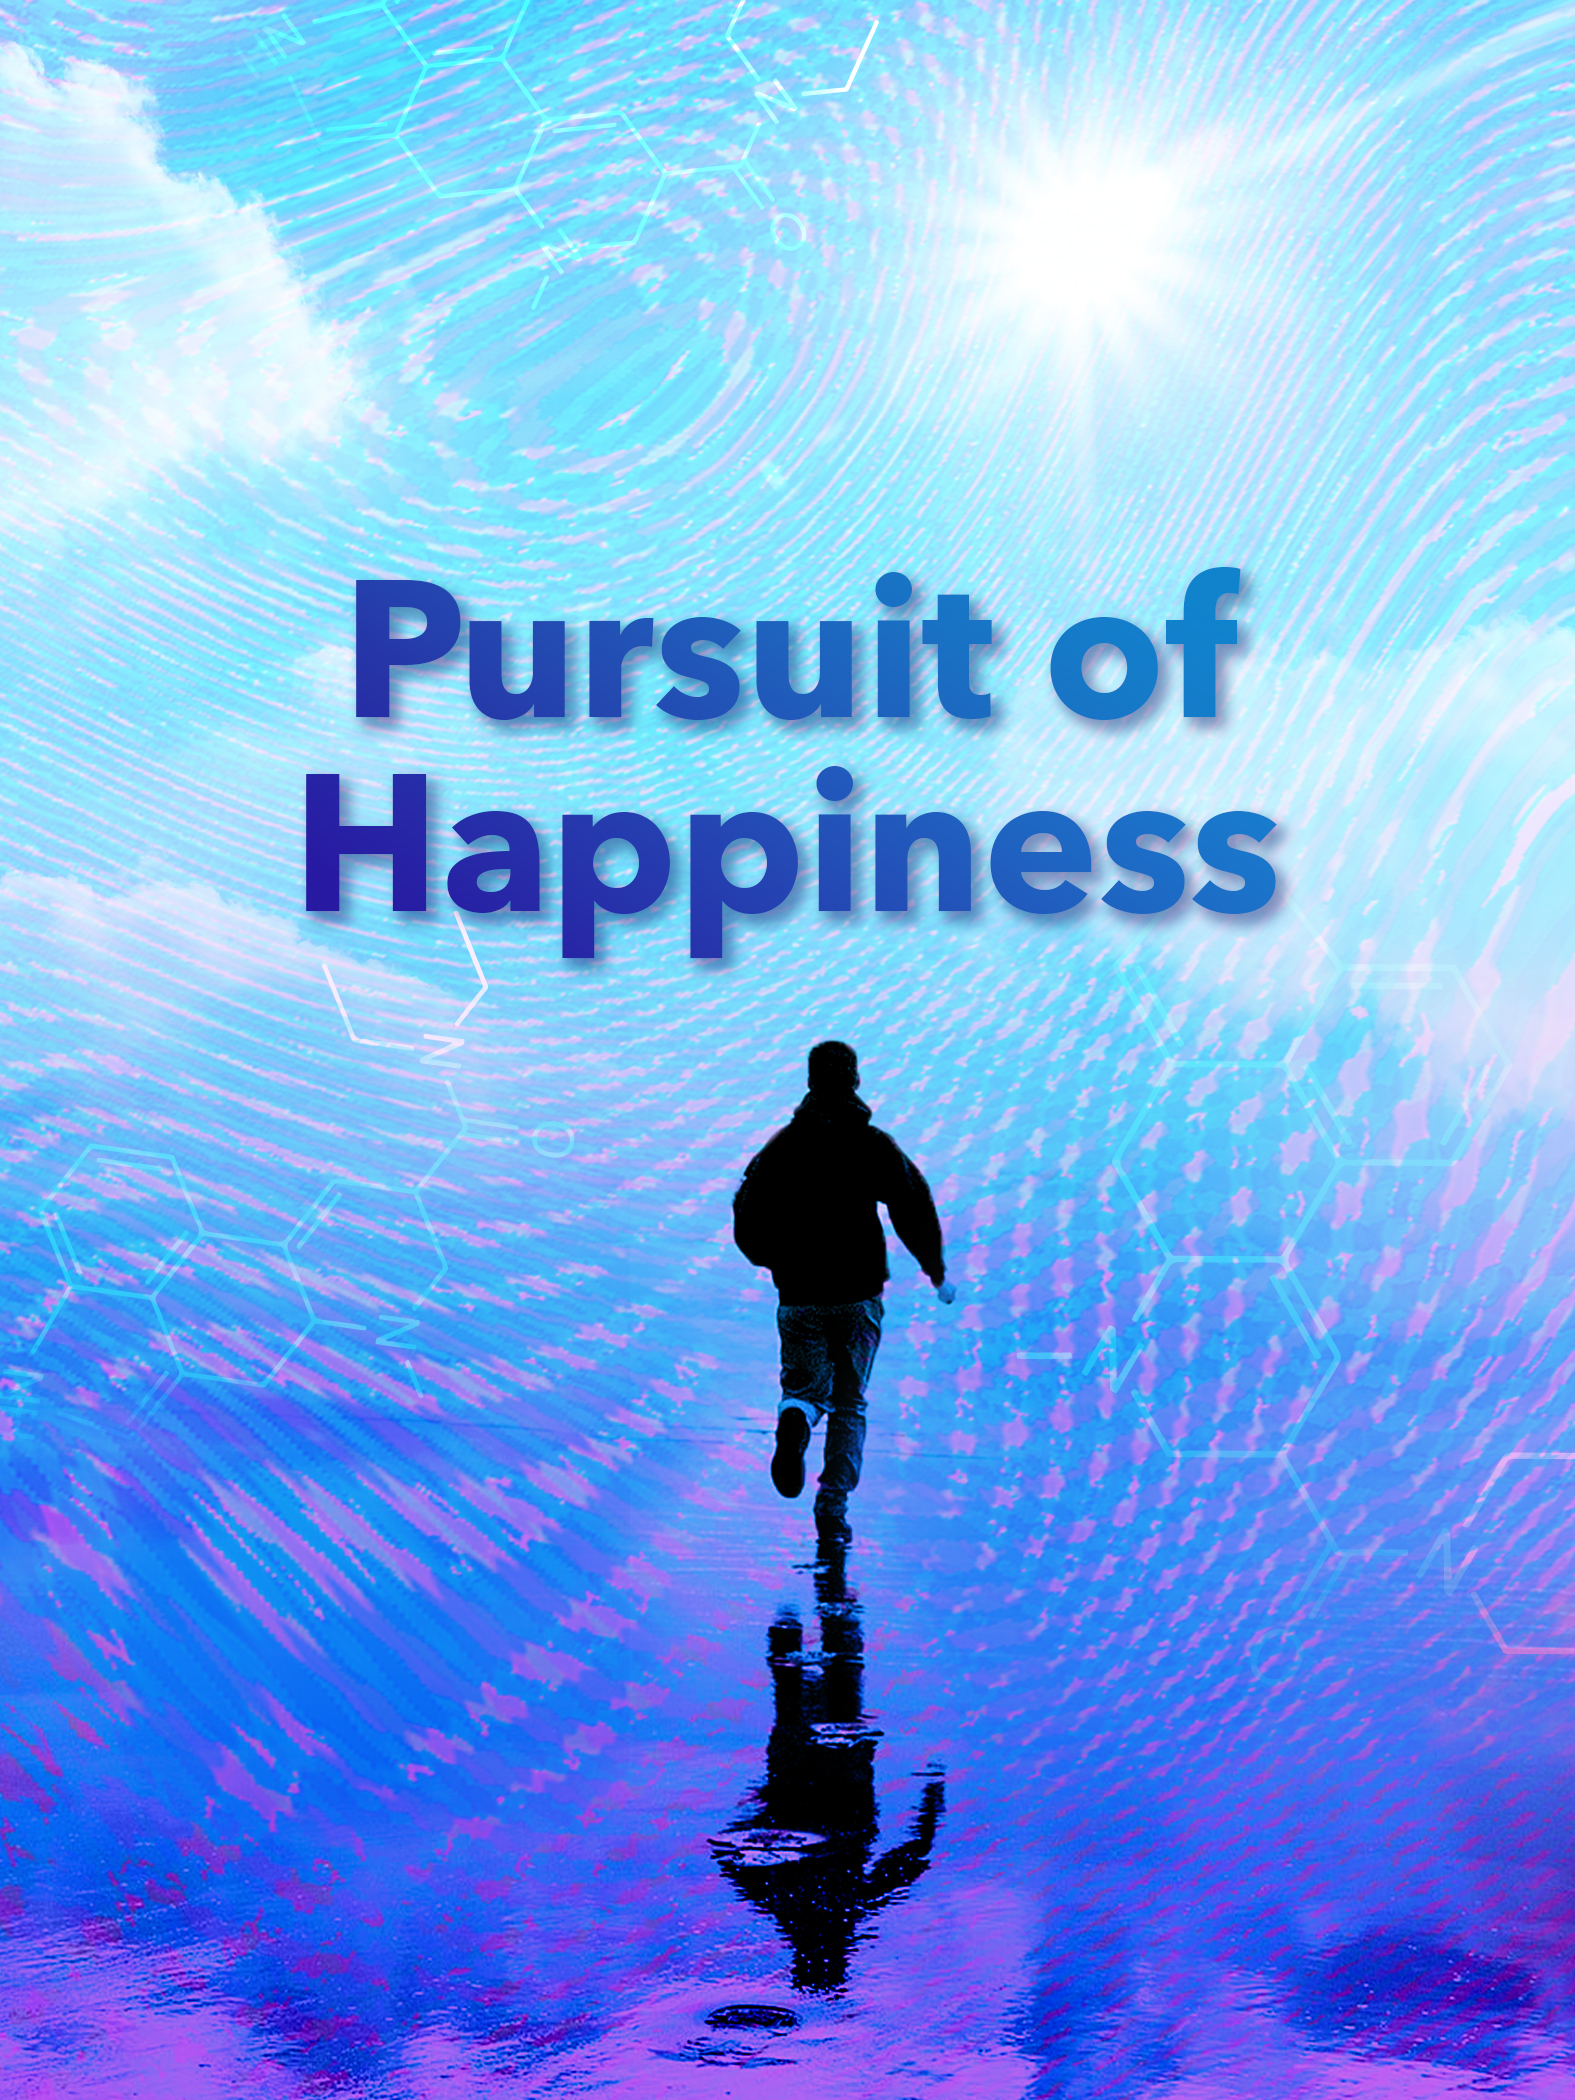 Key art for the documentary series Pursuit of Happiness that shows a person in silhouette running on a wet shoreline.